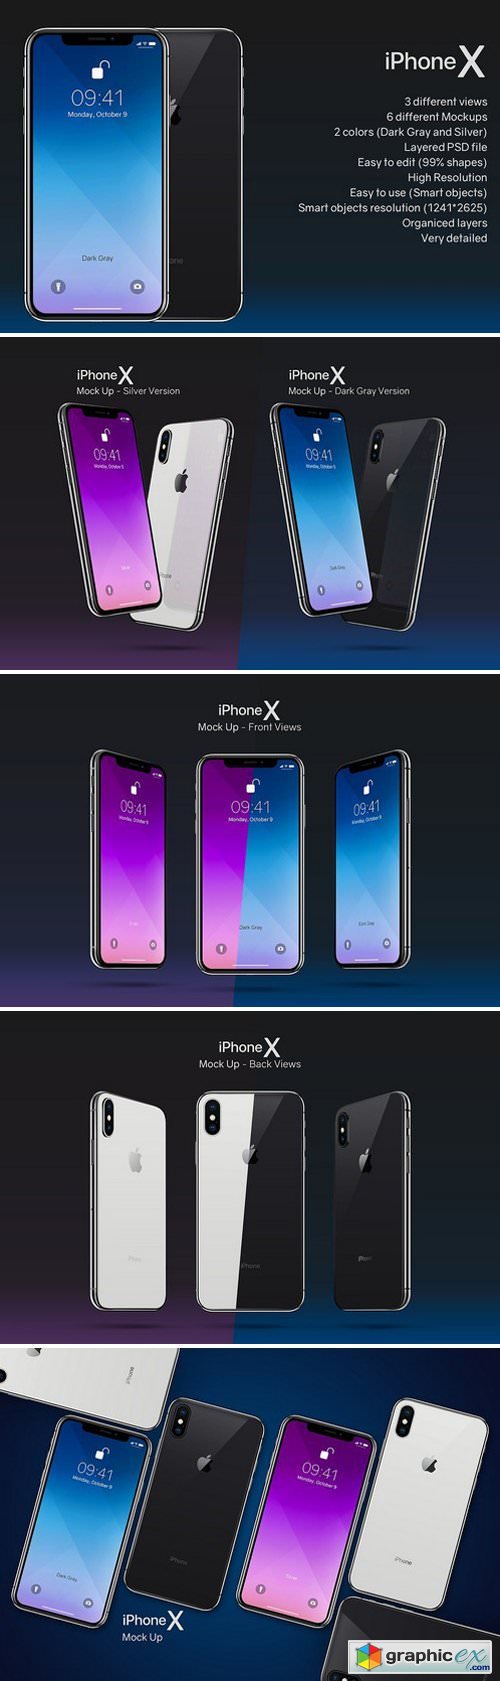 Mockup Composition Iphone X